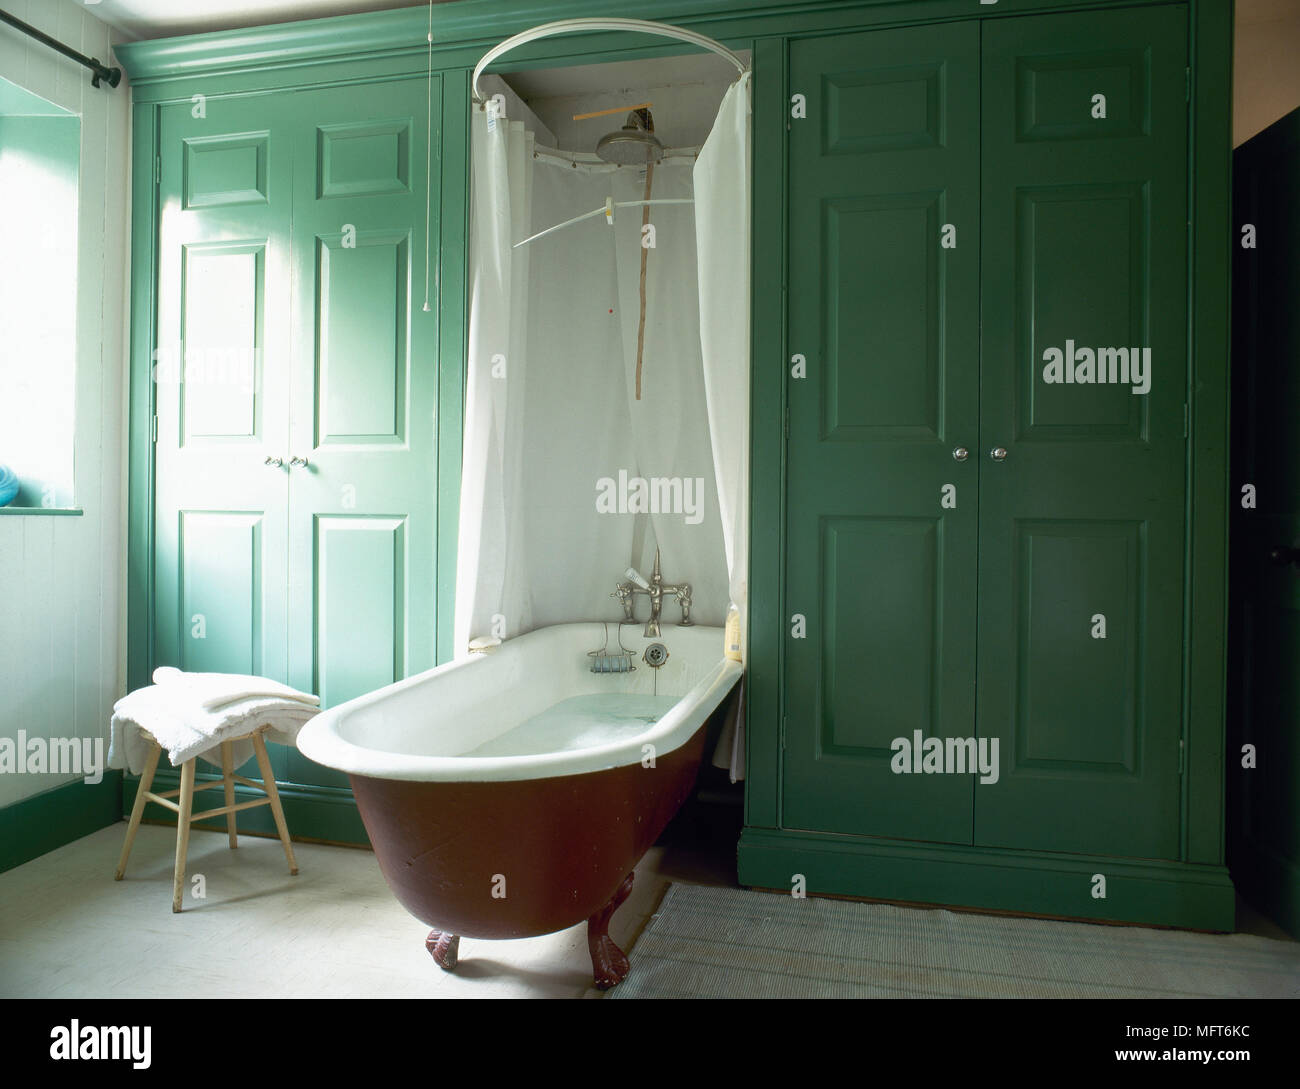 Traditional Bathroom With Built-In Cupboards, Free Standing Roll Top Bathtub,  And A Canopy Shower Curtain Stock Photo - Alamy